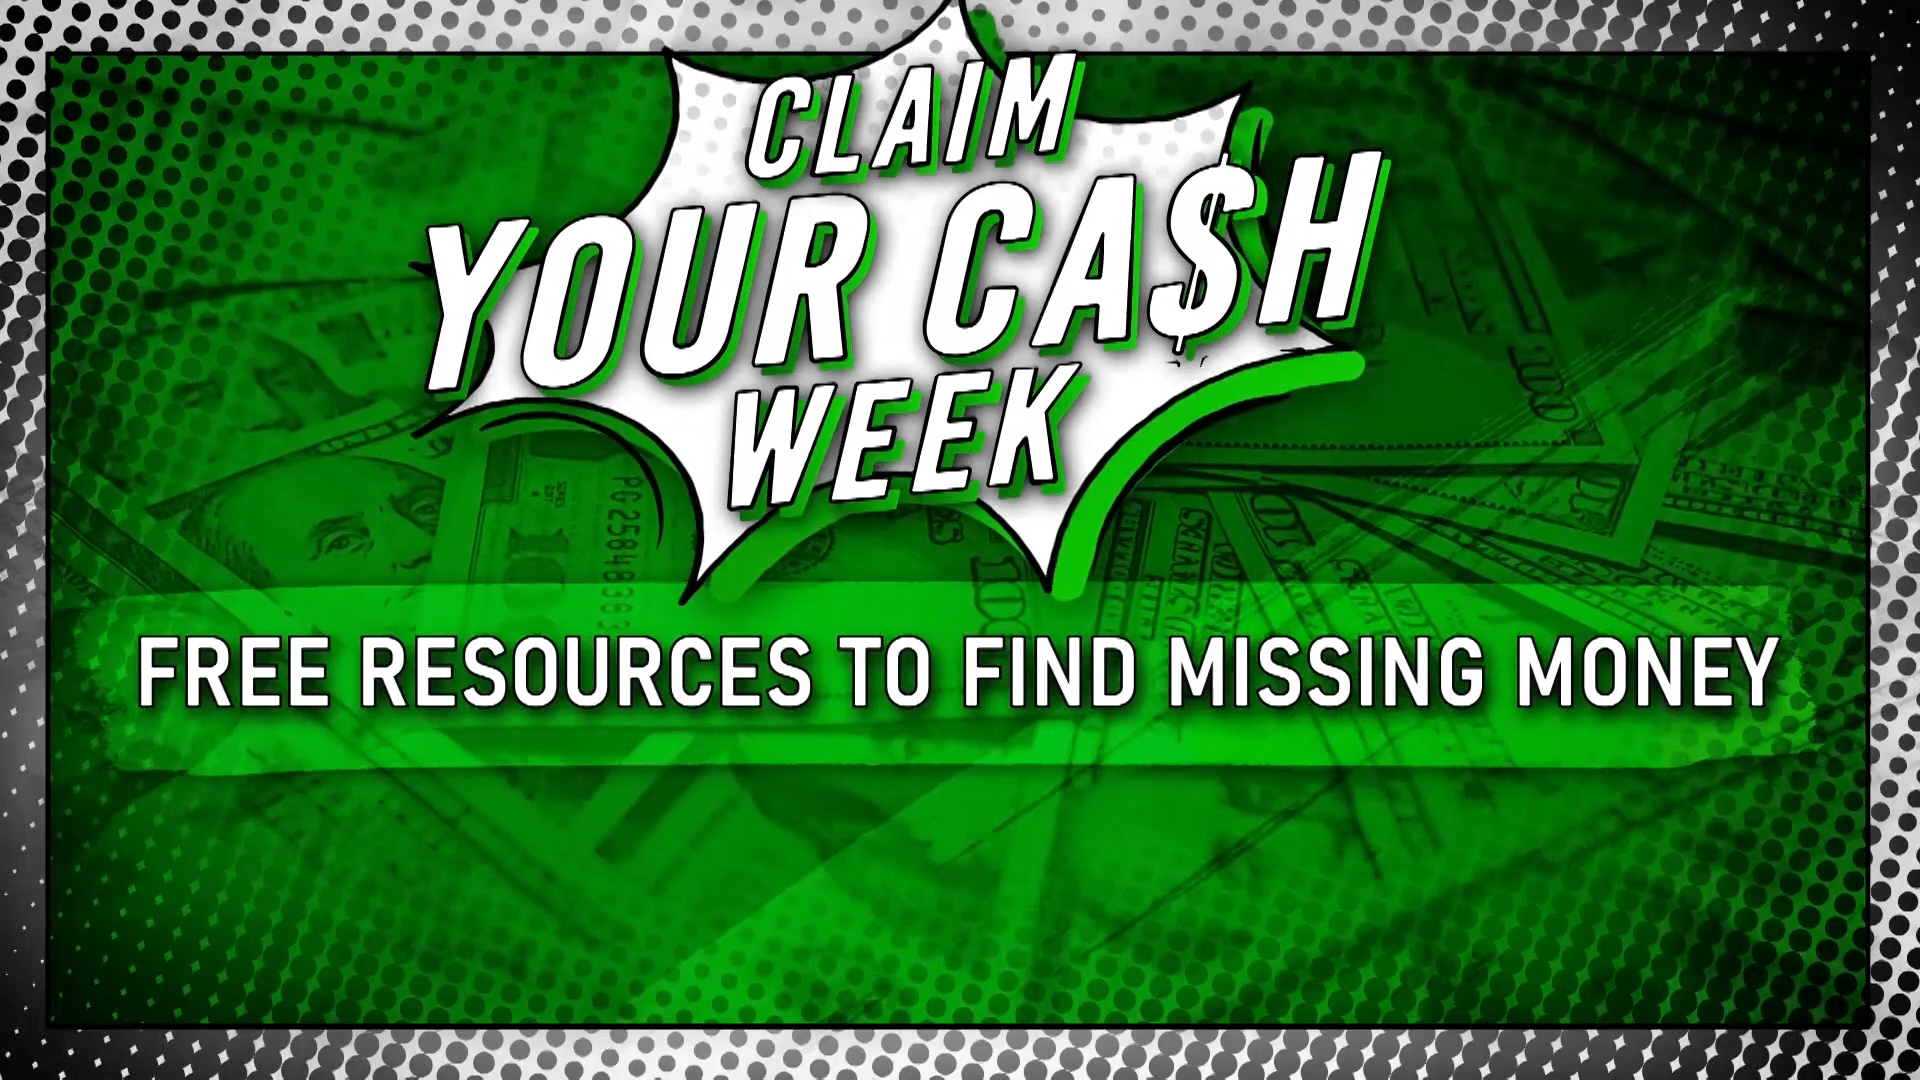 Claim your cash week | free resources to find missing money